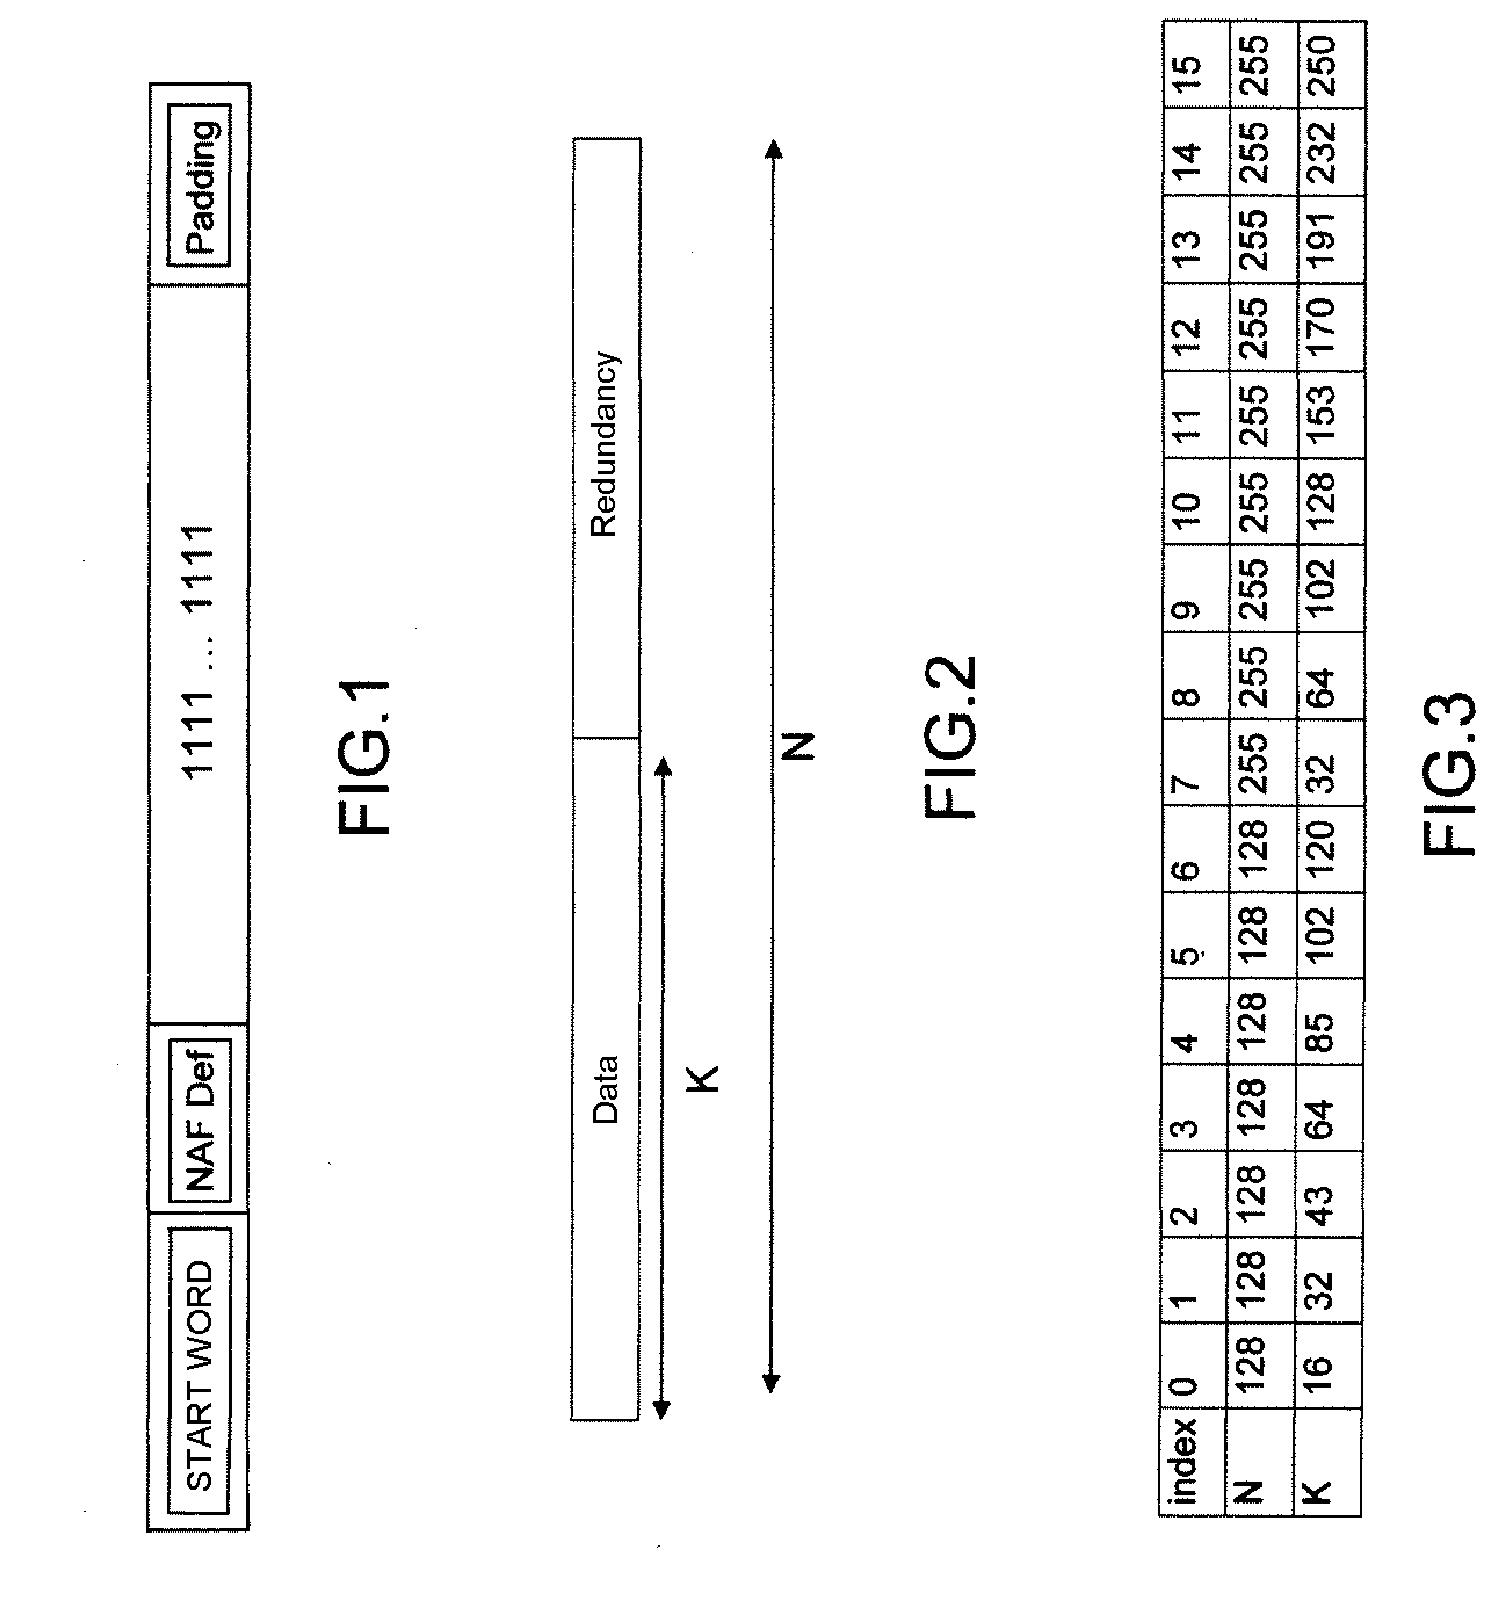 Method for protecting multimedia data using additional network abstraction layers (NAL)